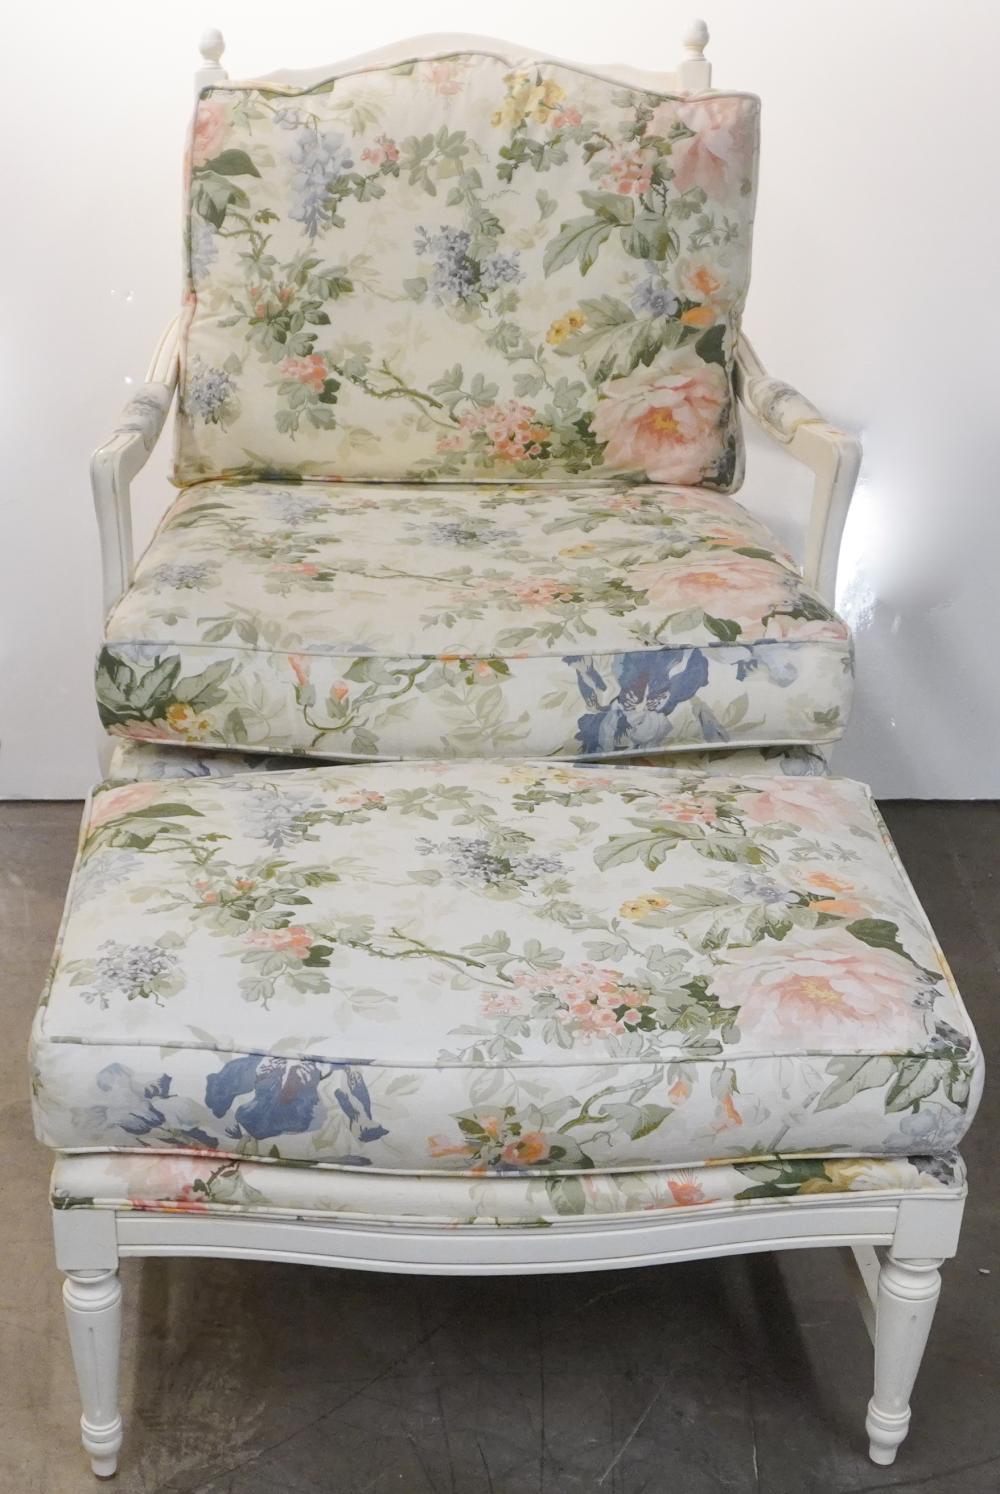 ETHAN ALLEN WHITE PAINTED AND FLORAL